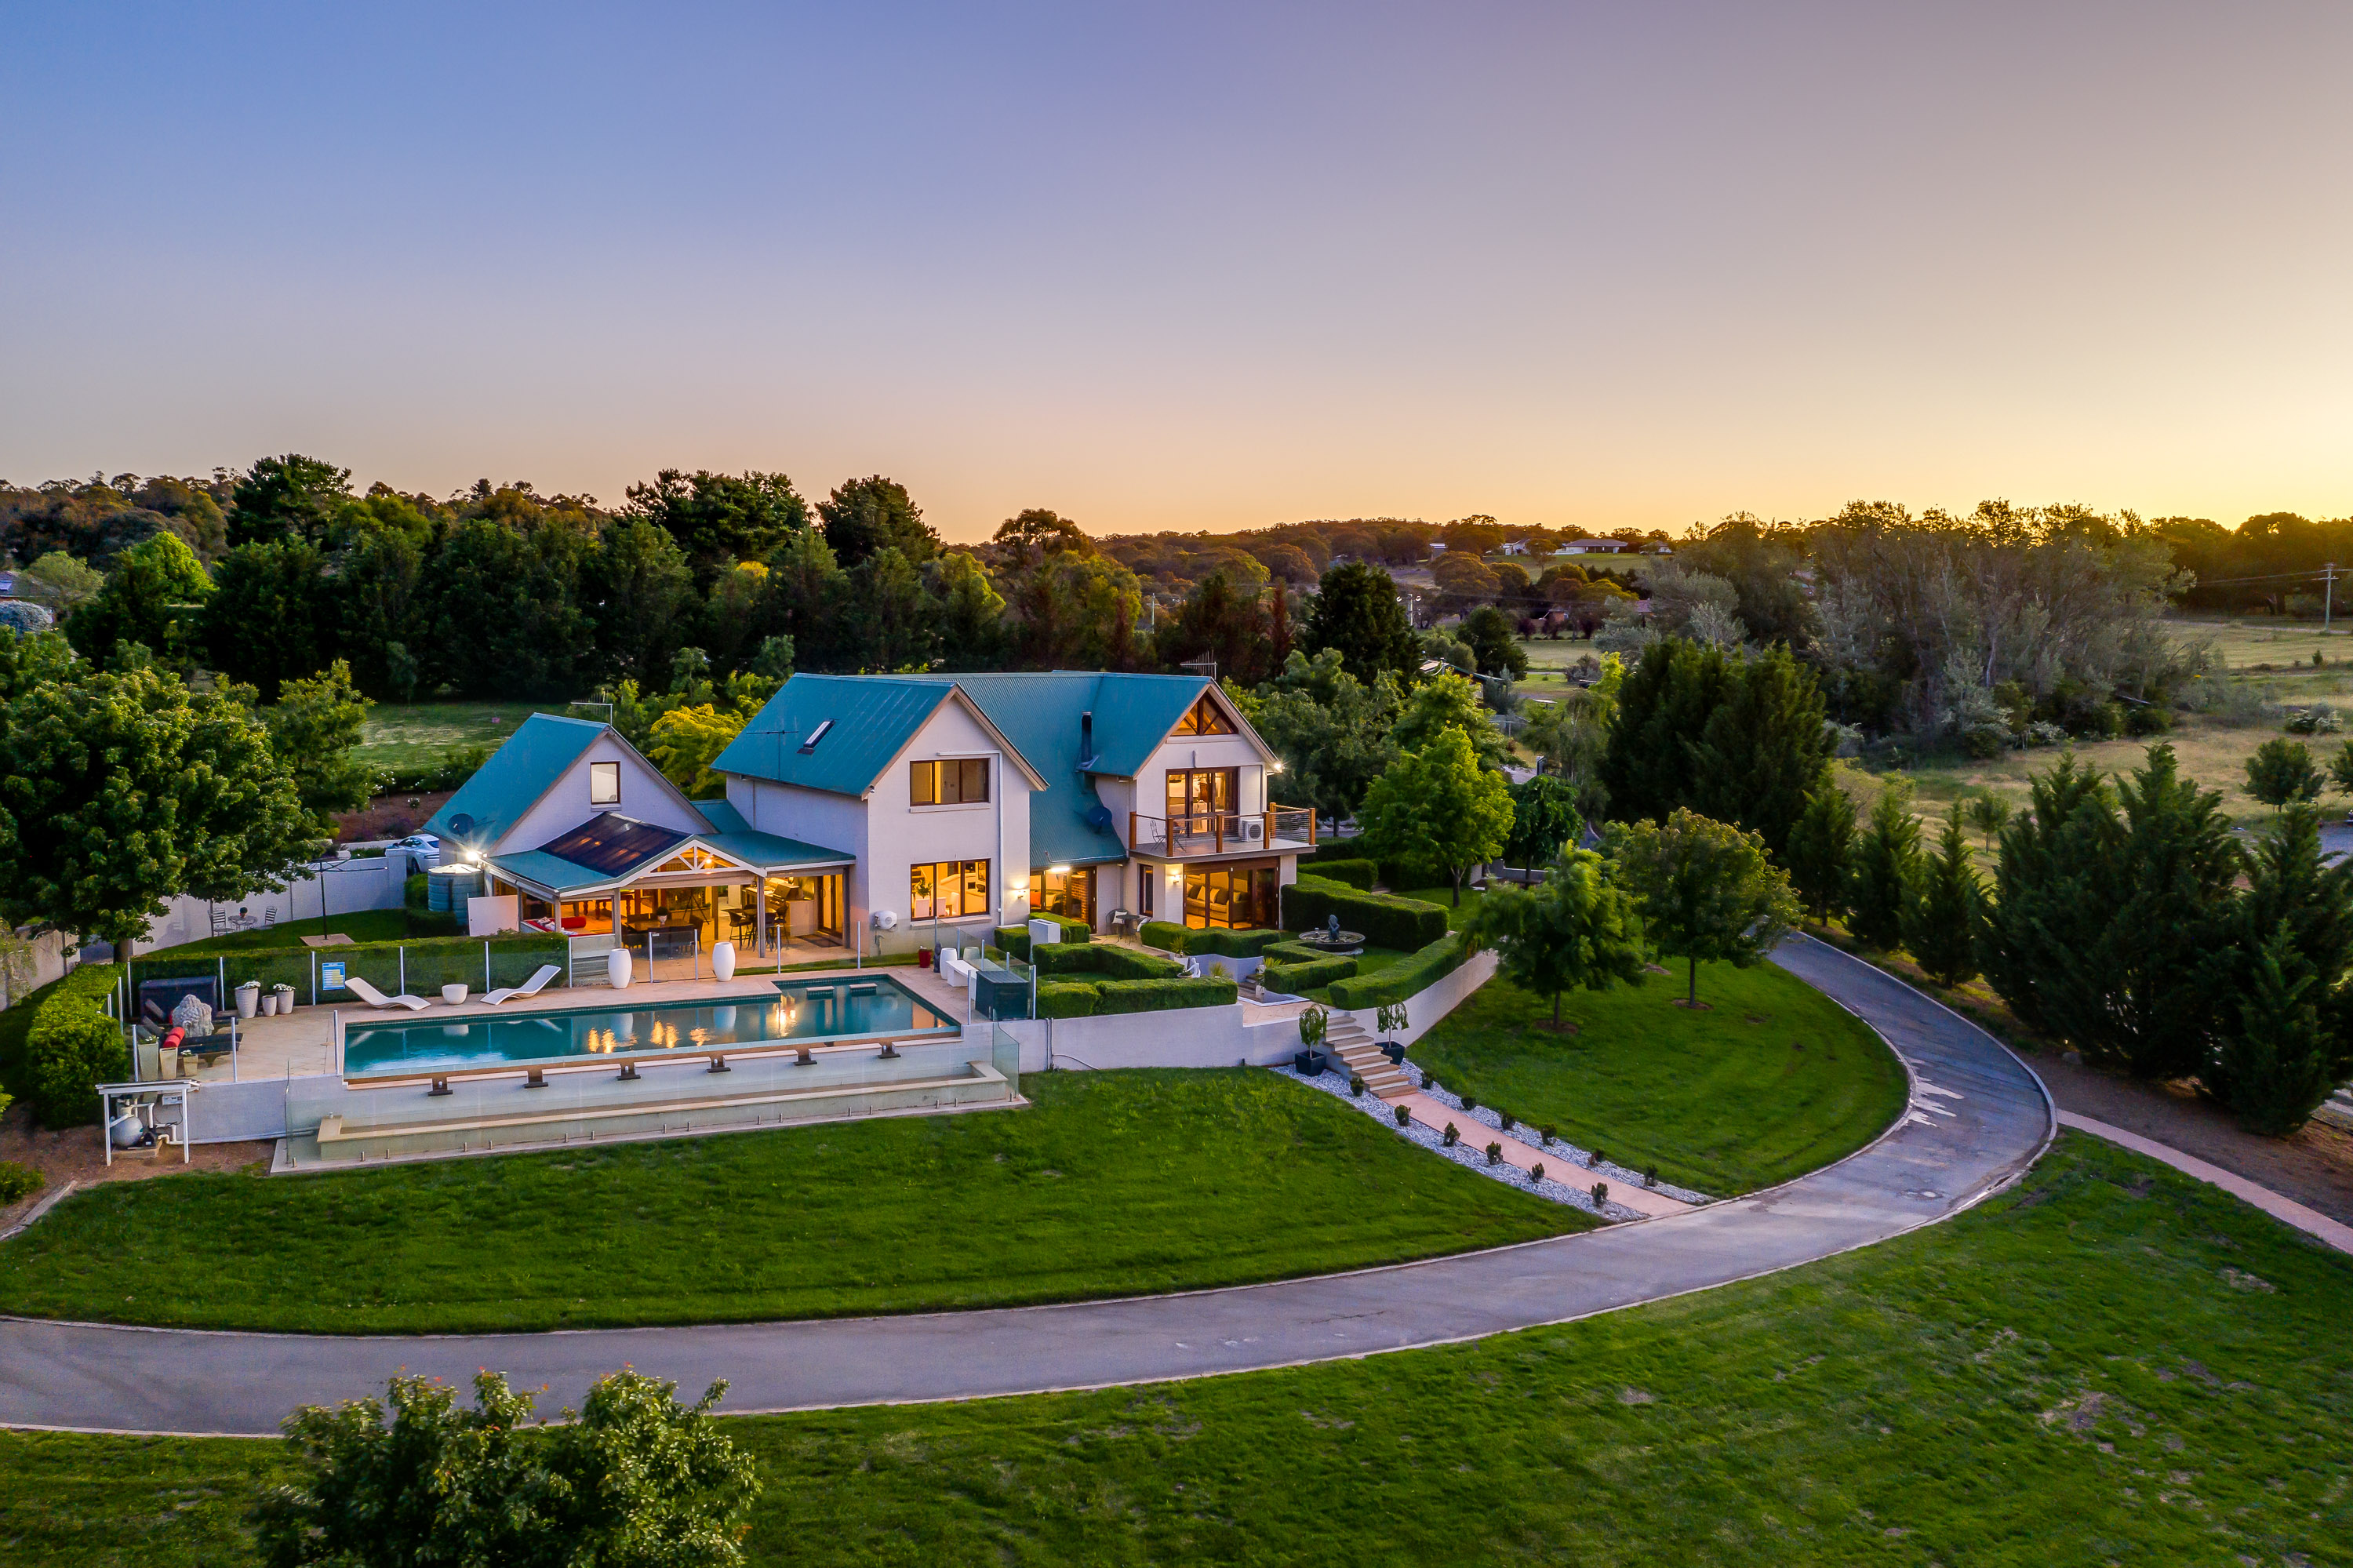 Luxurious Goulburn garden estate and residence provides real self sufficiency